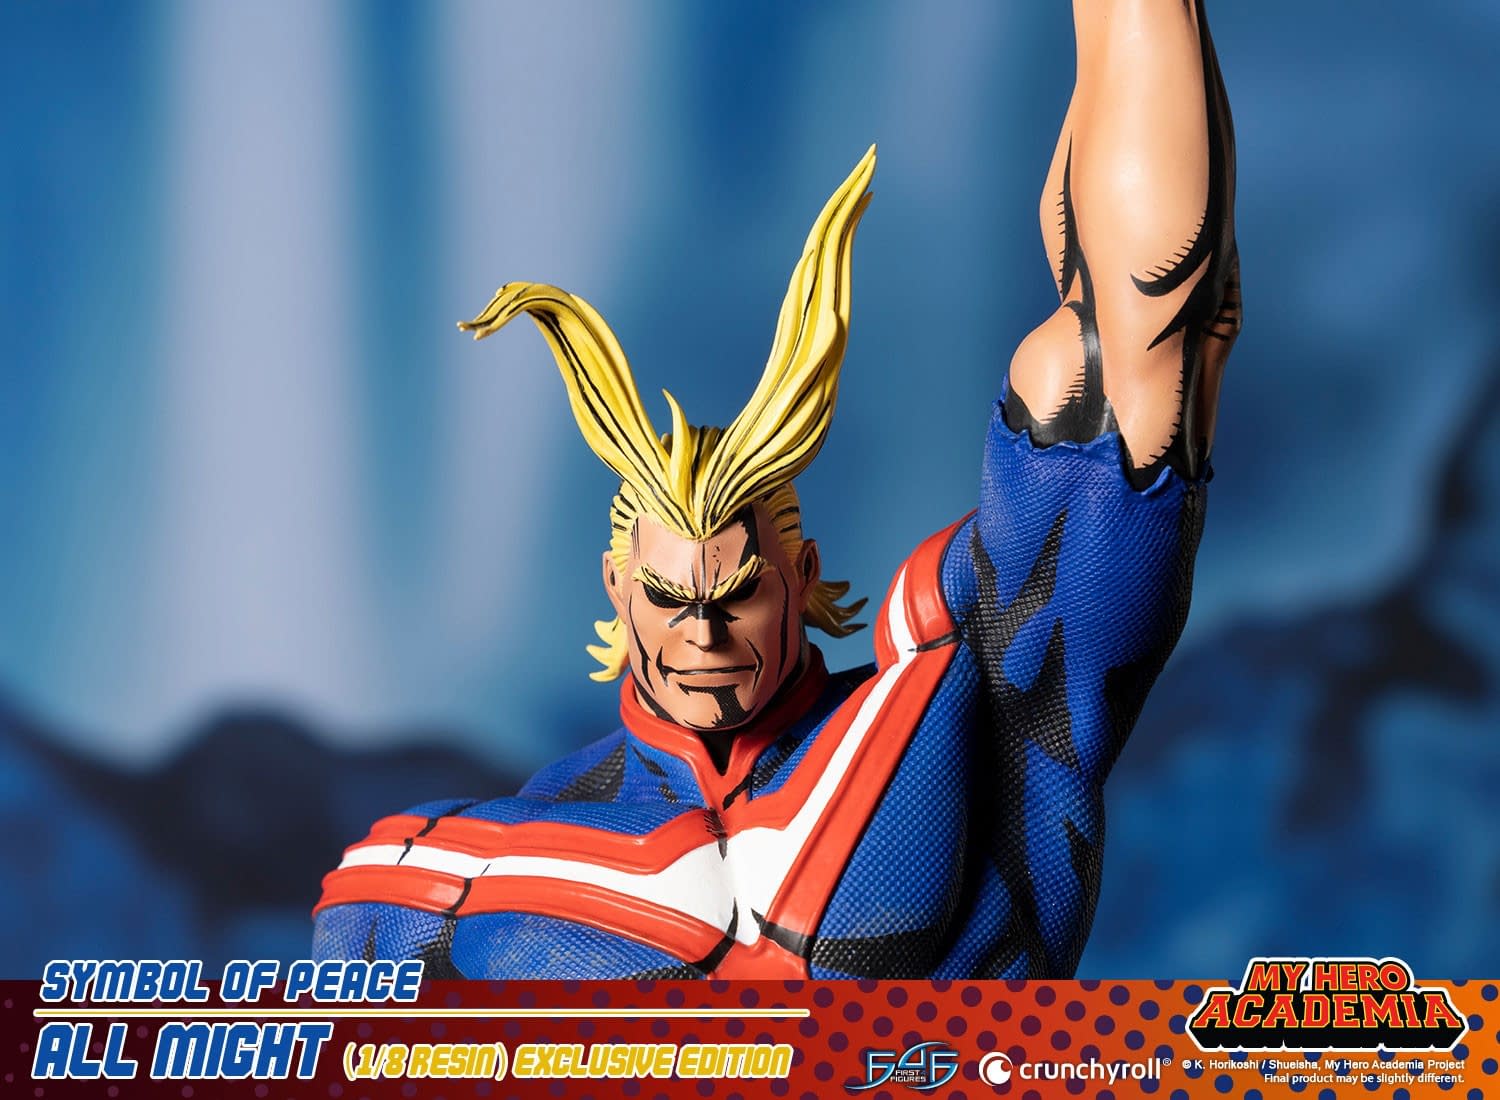 My Hero Academia's All Might is a Symbol of Peace with First 4 Figures